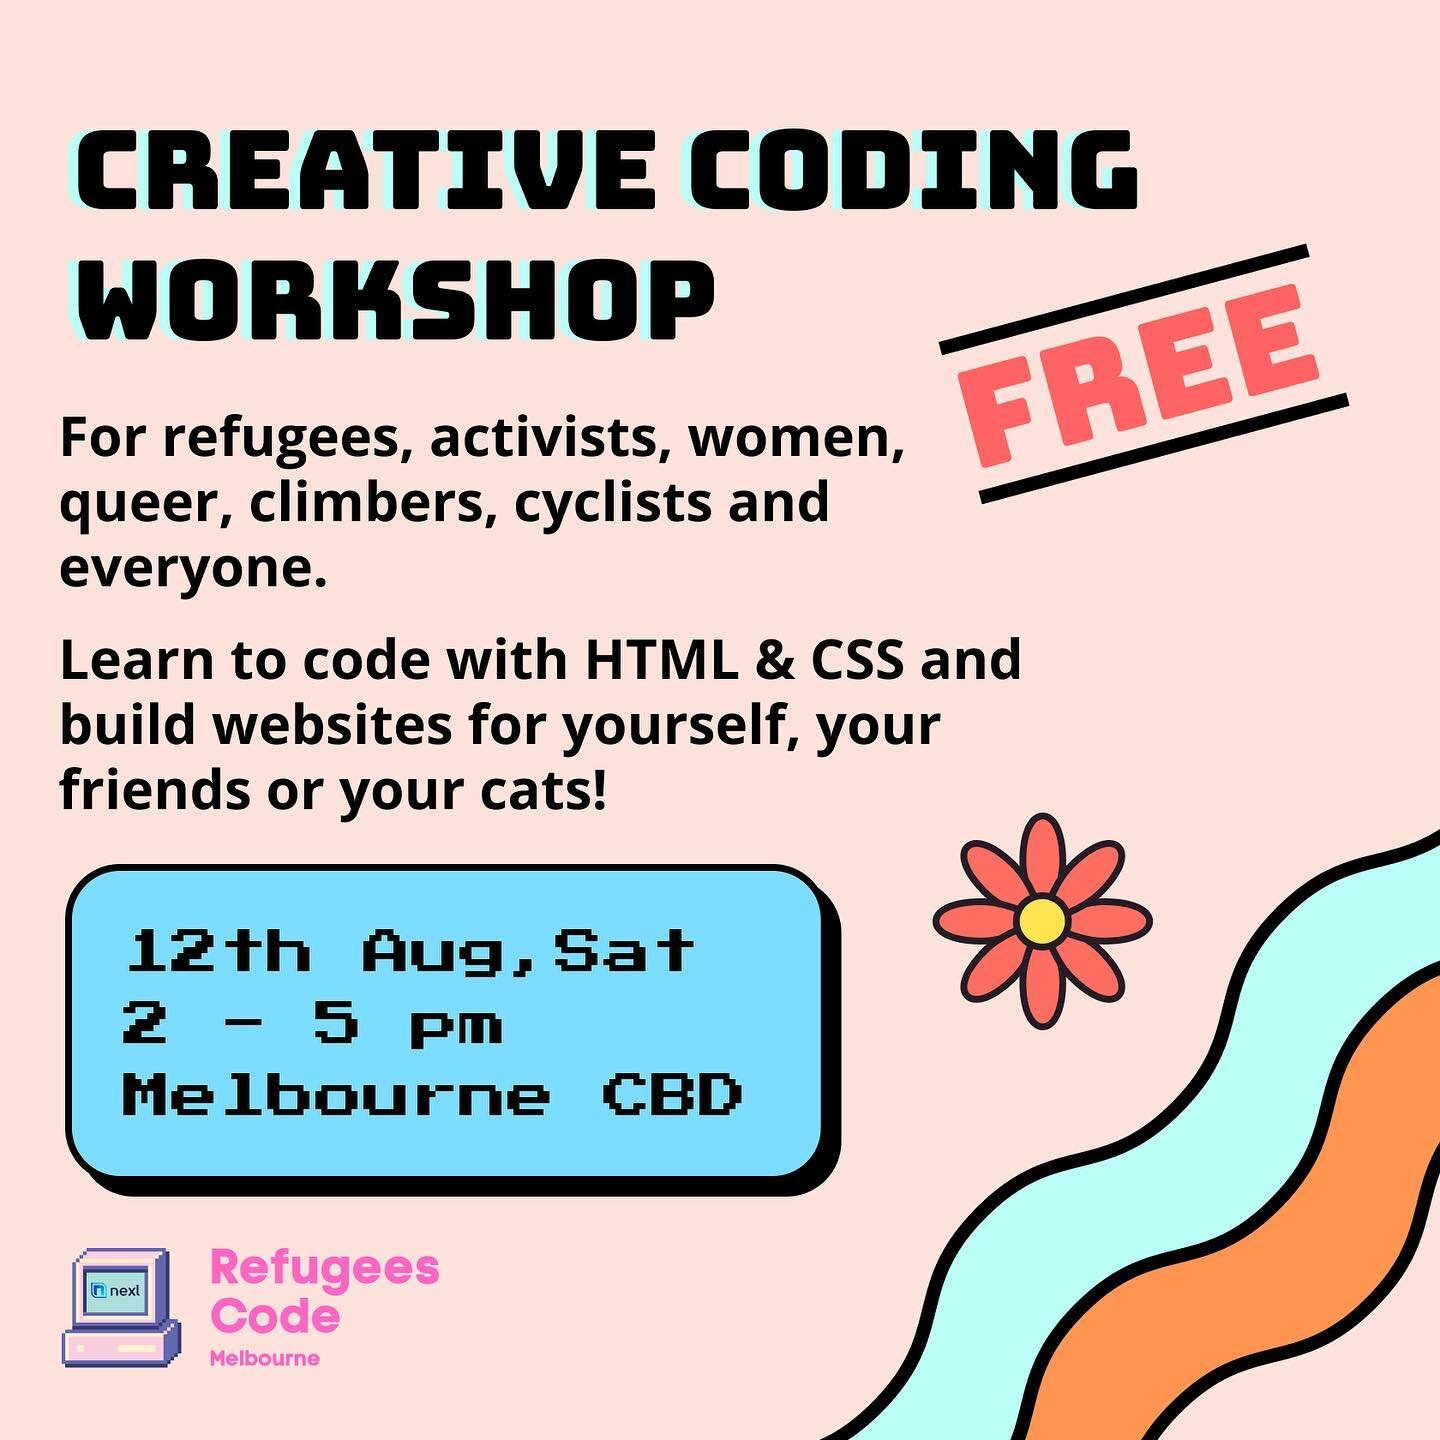 ⏰Mark your calendars for the ultimate coding journey! 🗓️ Our next FREE HTML &amp; CSS basics coding workshop is just around the corner! 🌟 Join us on 12th August for an unforgettable experience of learning and fun! All are welcome - refugees, dreame